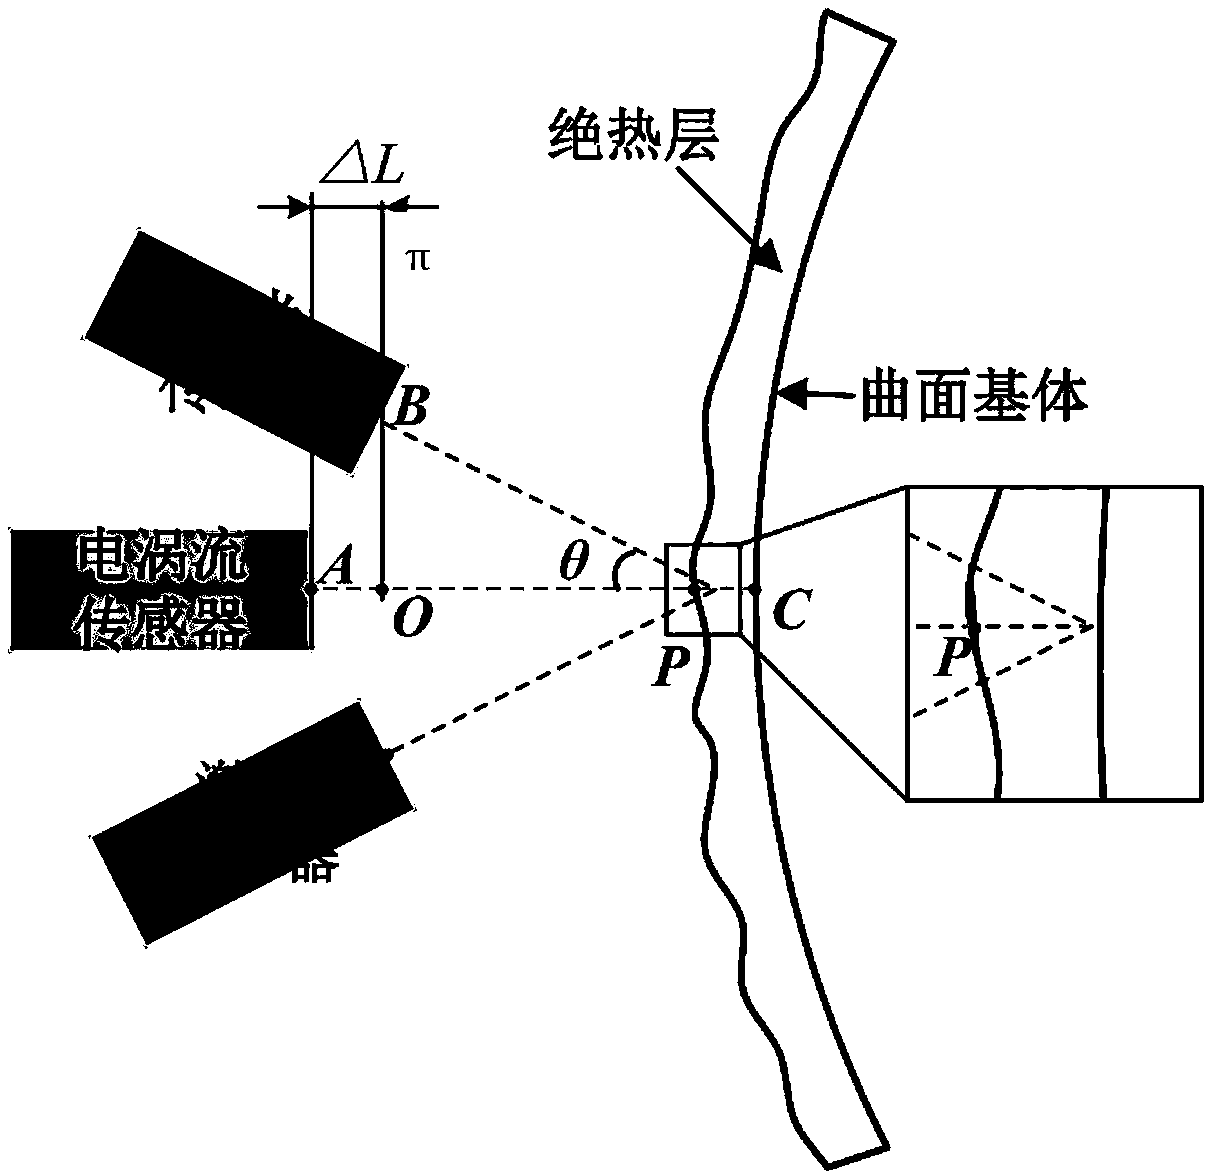 Non-contact type measuring method and device for metal surface coating thickness